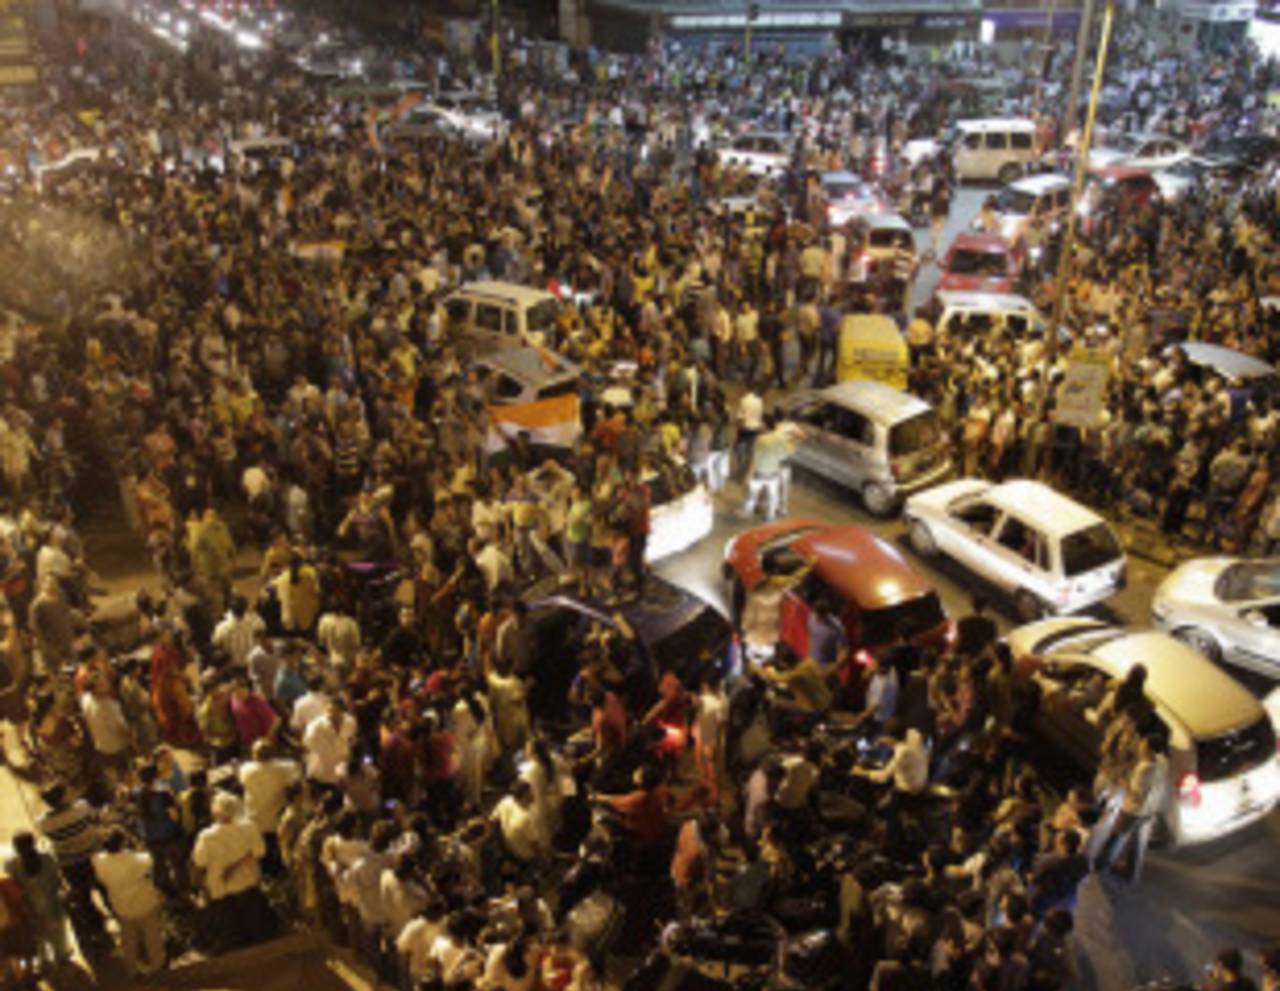 Jubilant scenes on an Ahmedabad street after India's victory, Ahmedabad, March 30, 2011